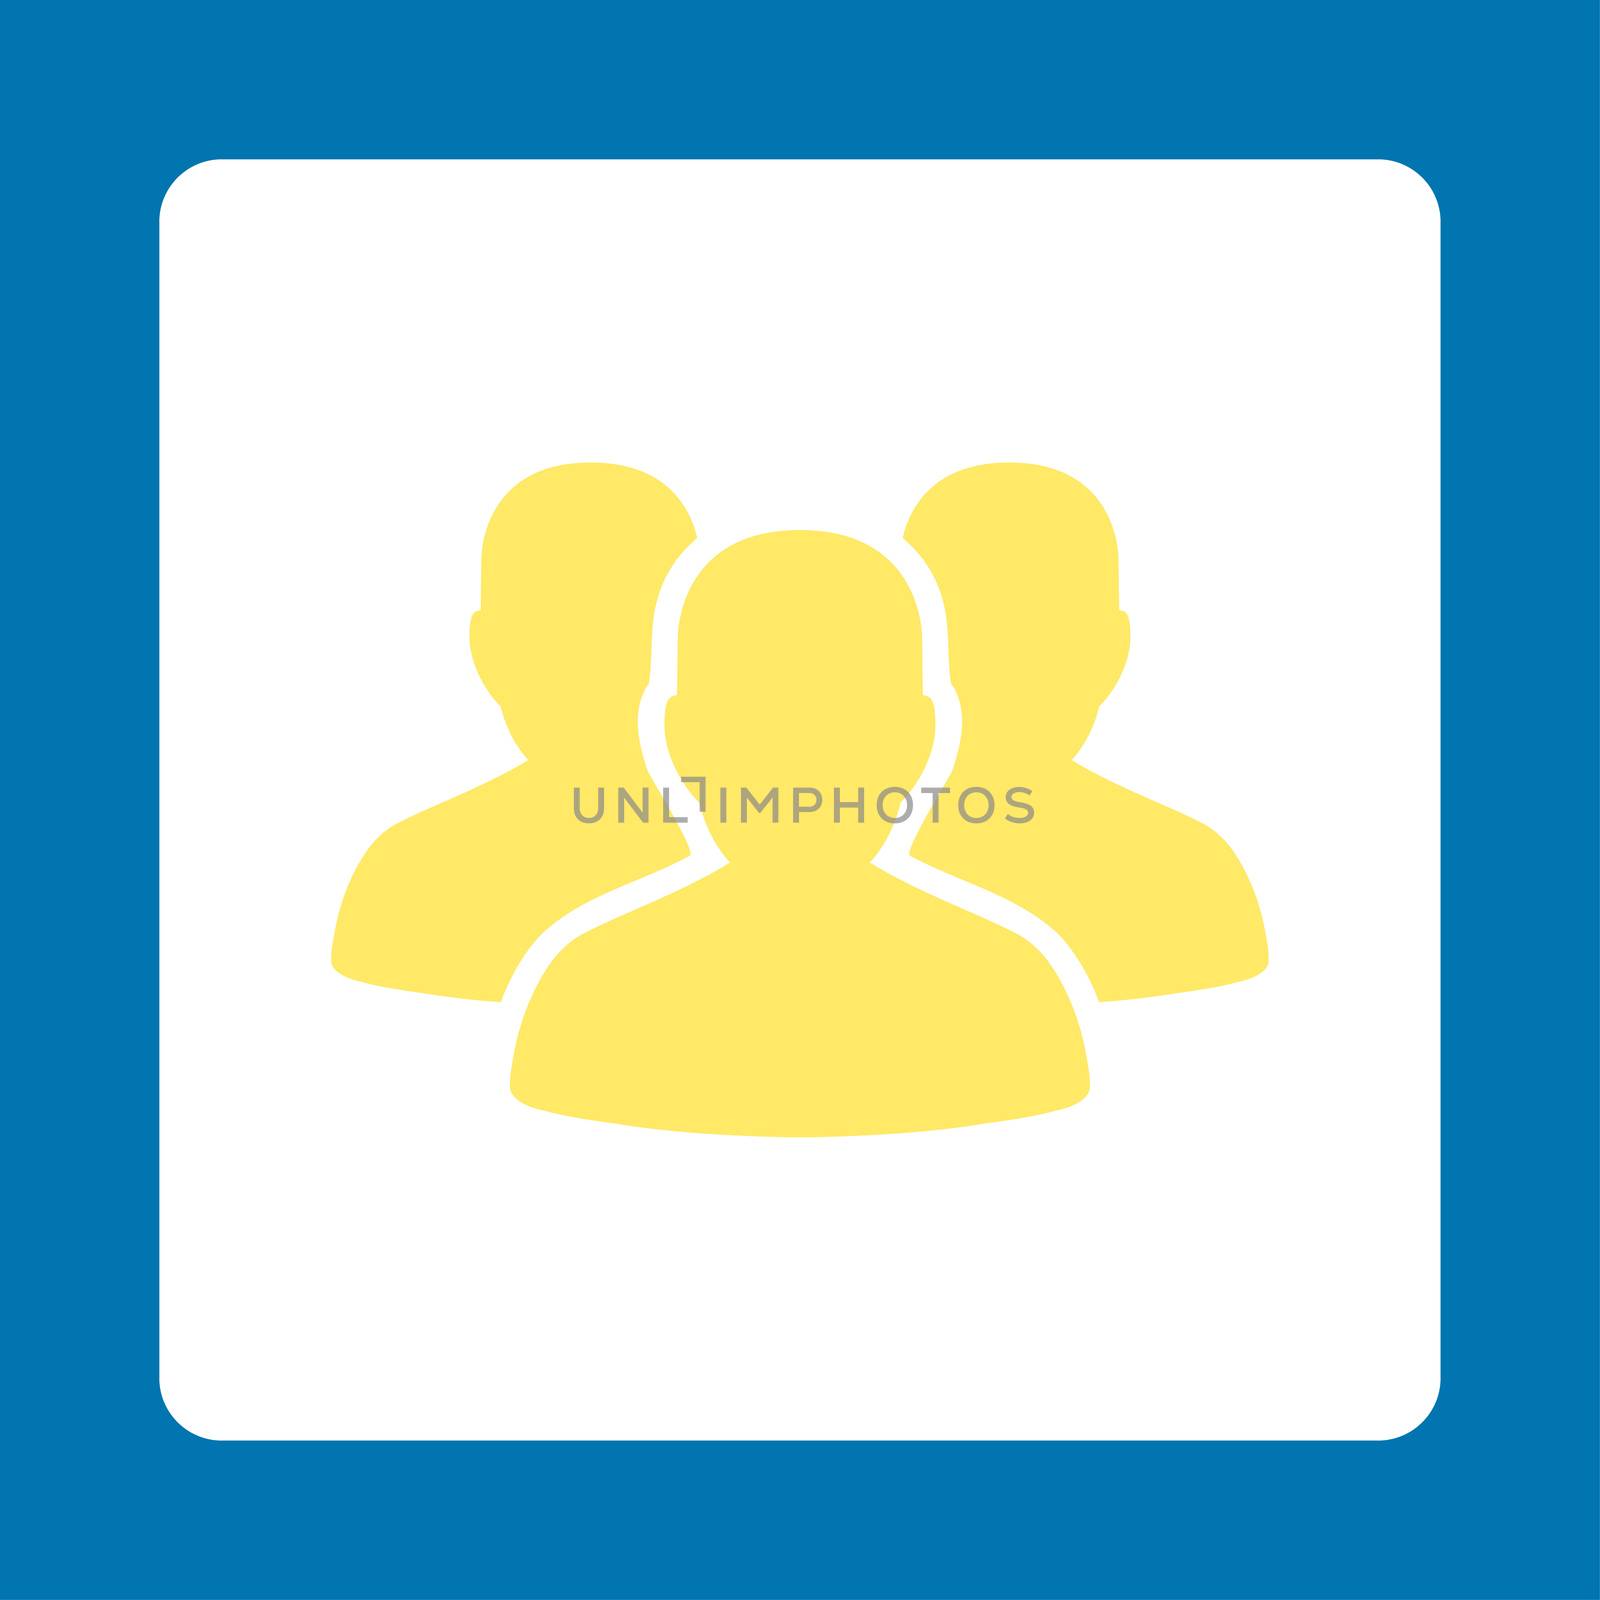 Account Group raster icon. This flat rounded square button uses yellow and white colors and isolated on a blue background.